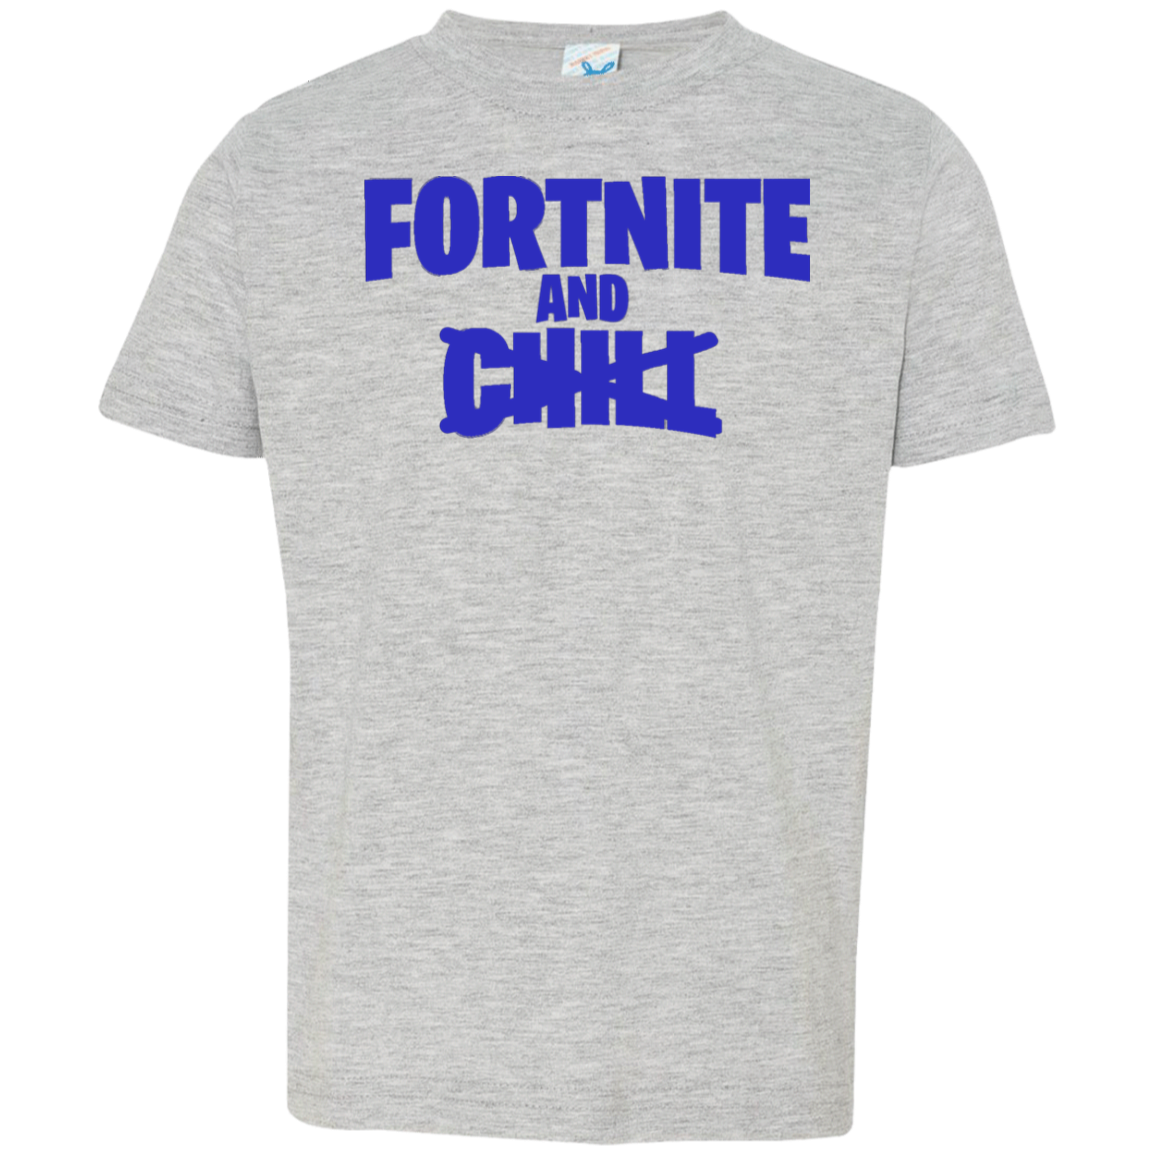 Fortnite And Chill Toddler T Shirt Top Shelf Tees Apparel - fortnite and chill toddler t shirt